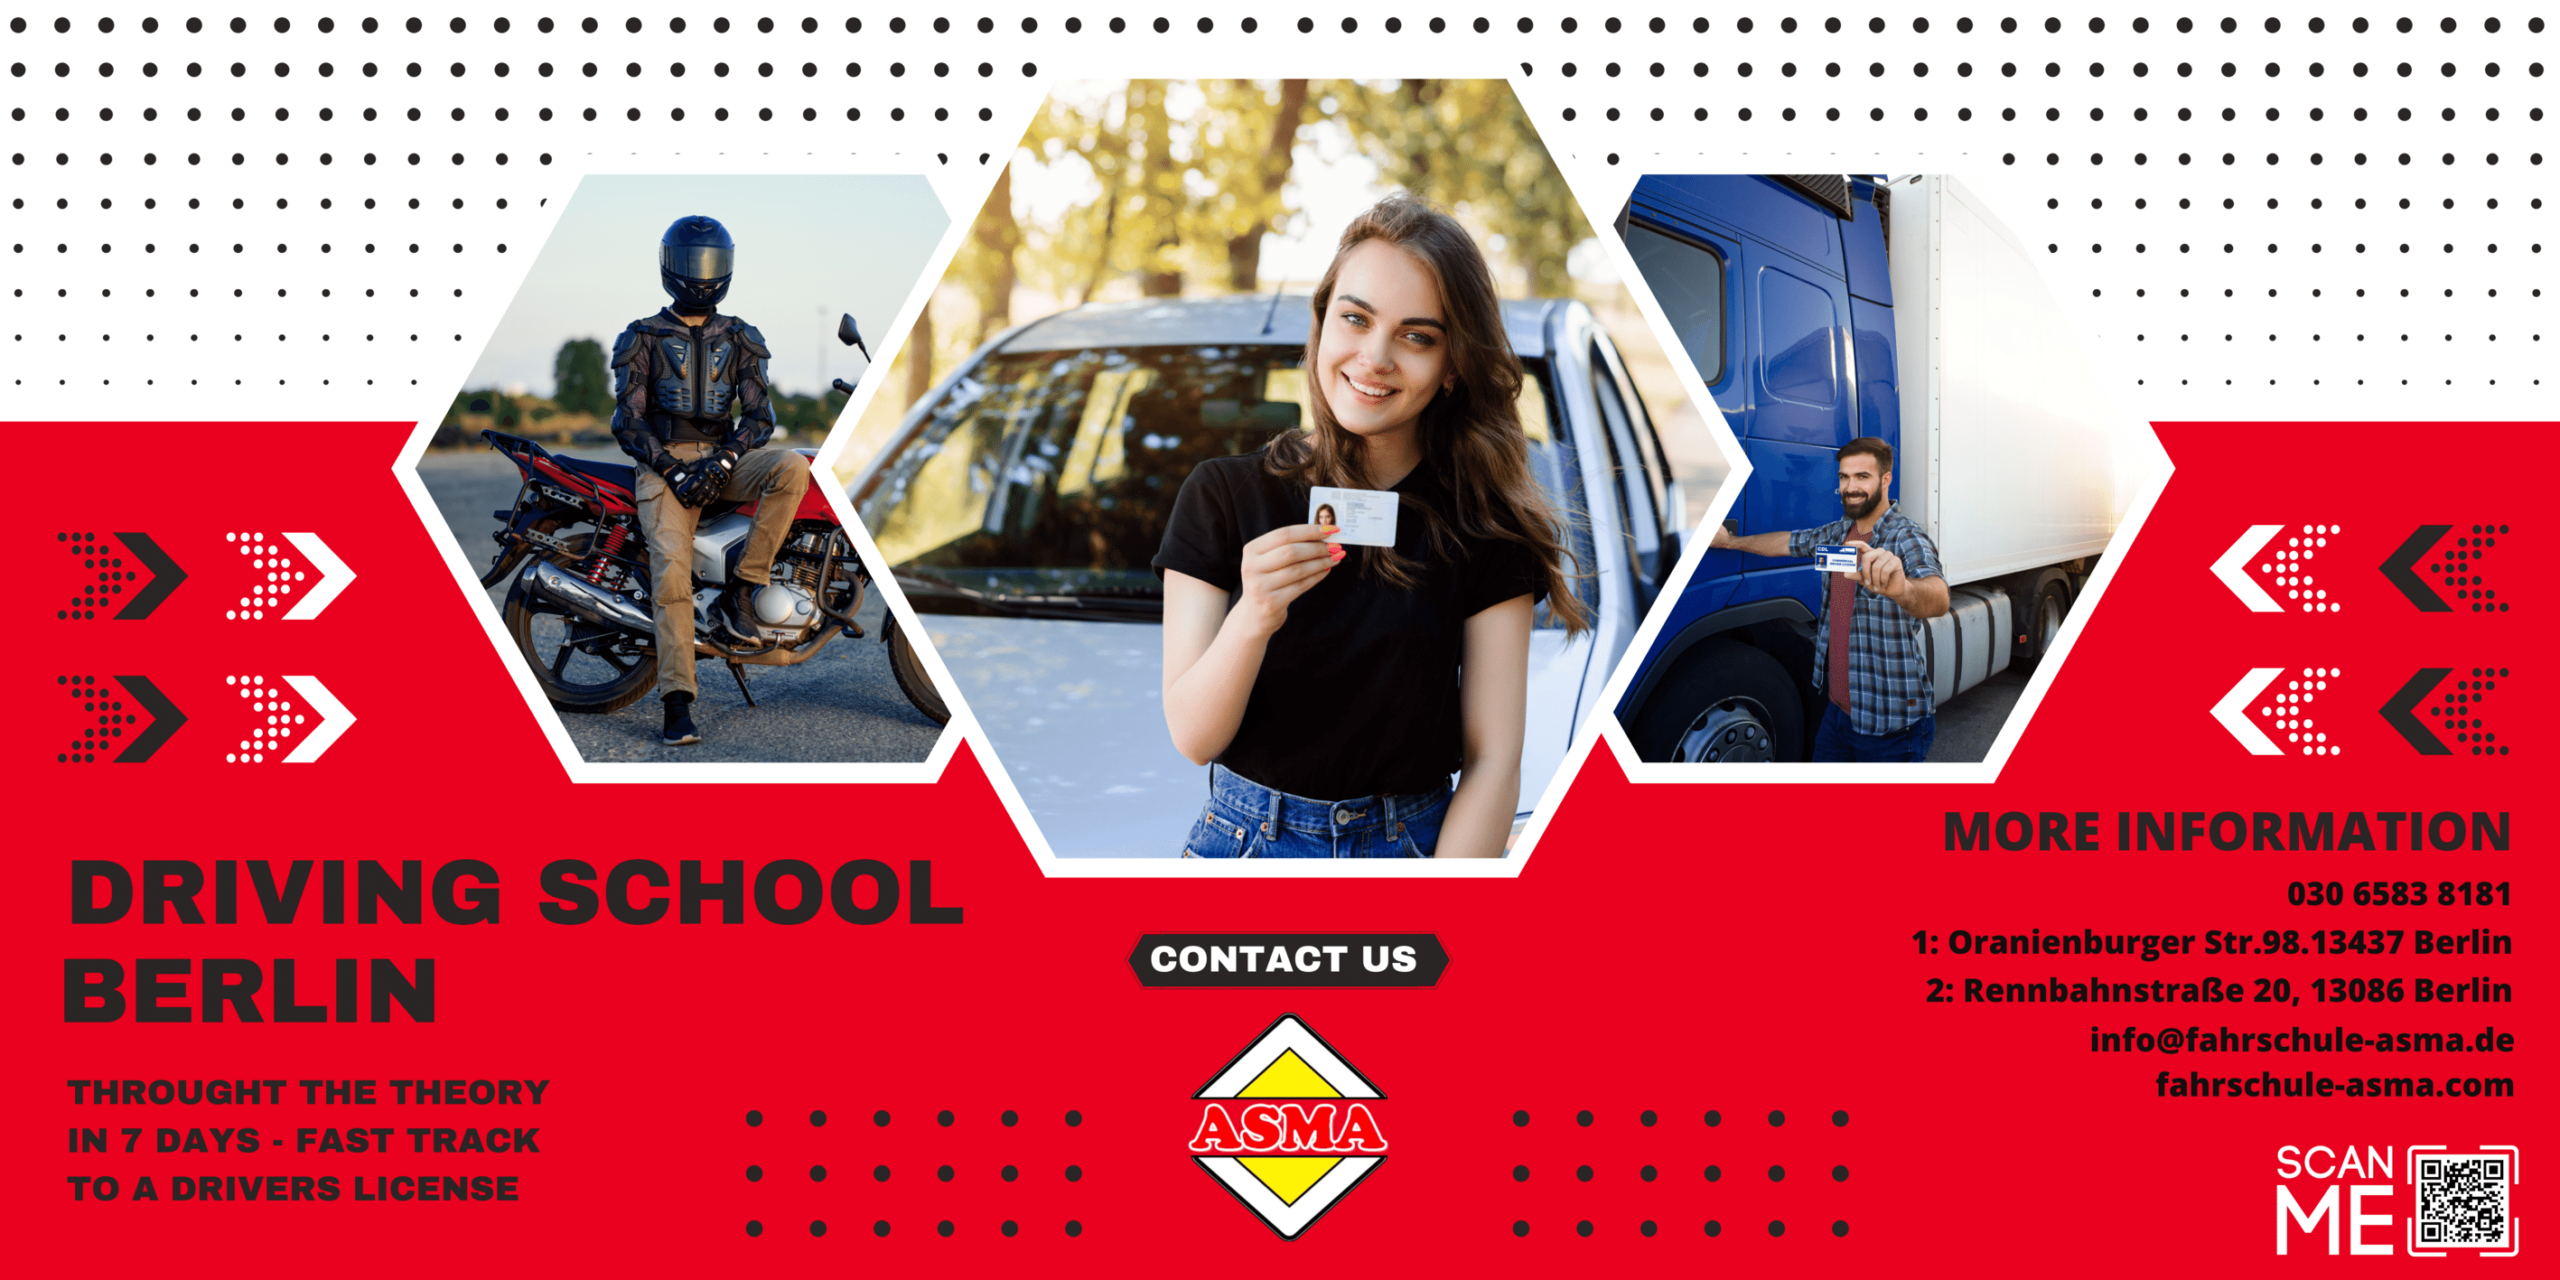 asma driving school Berlin offers now in English , German and turkey